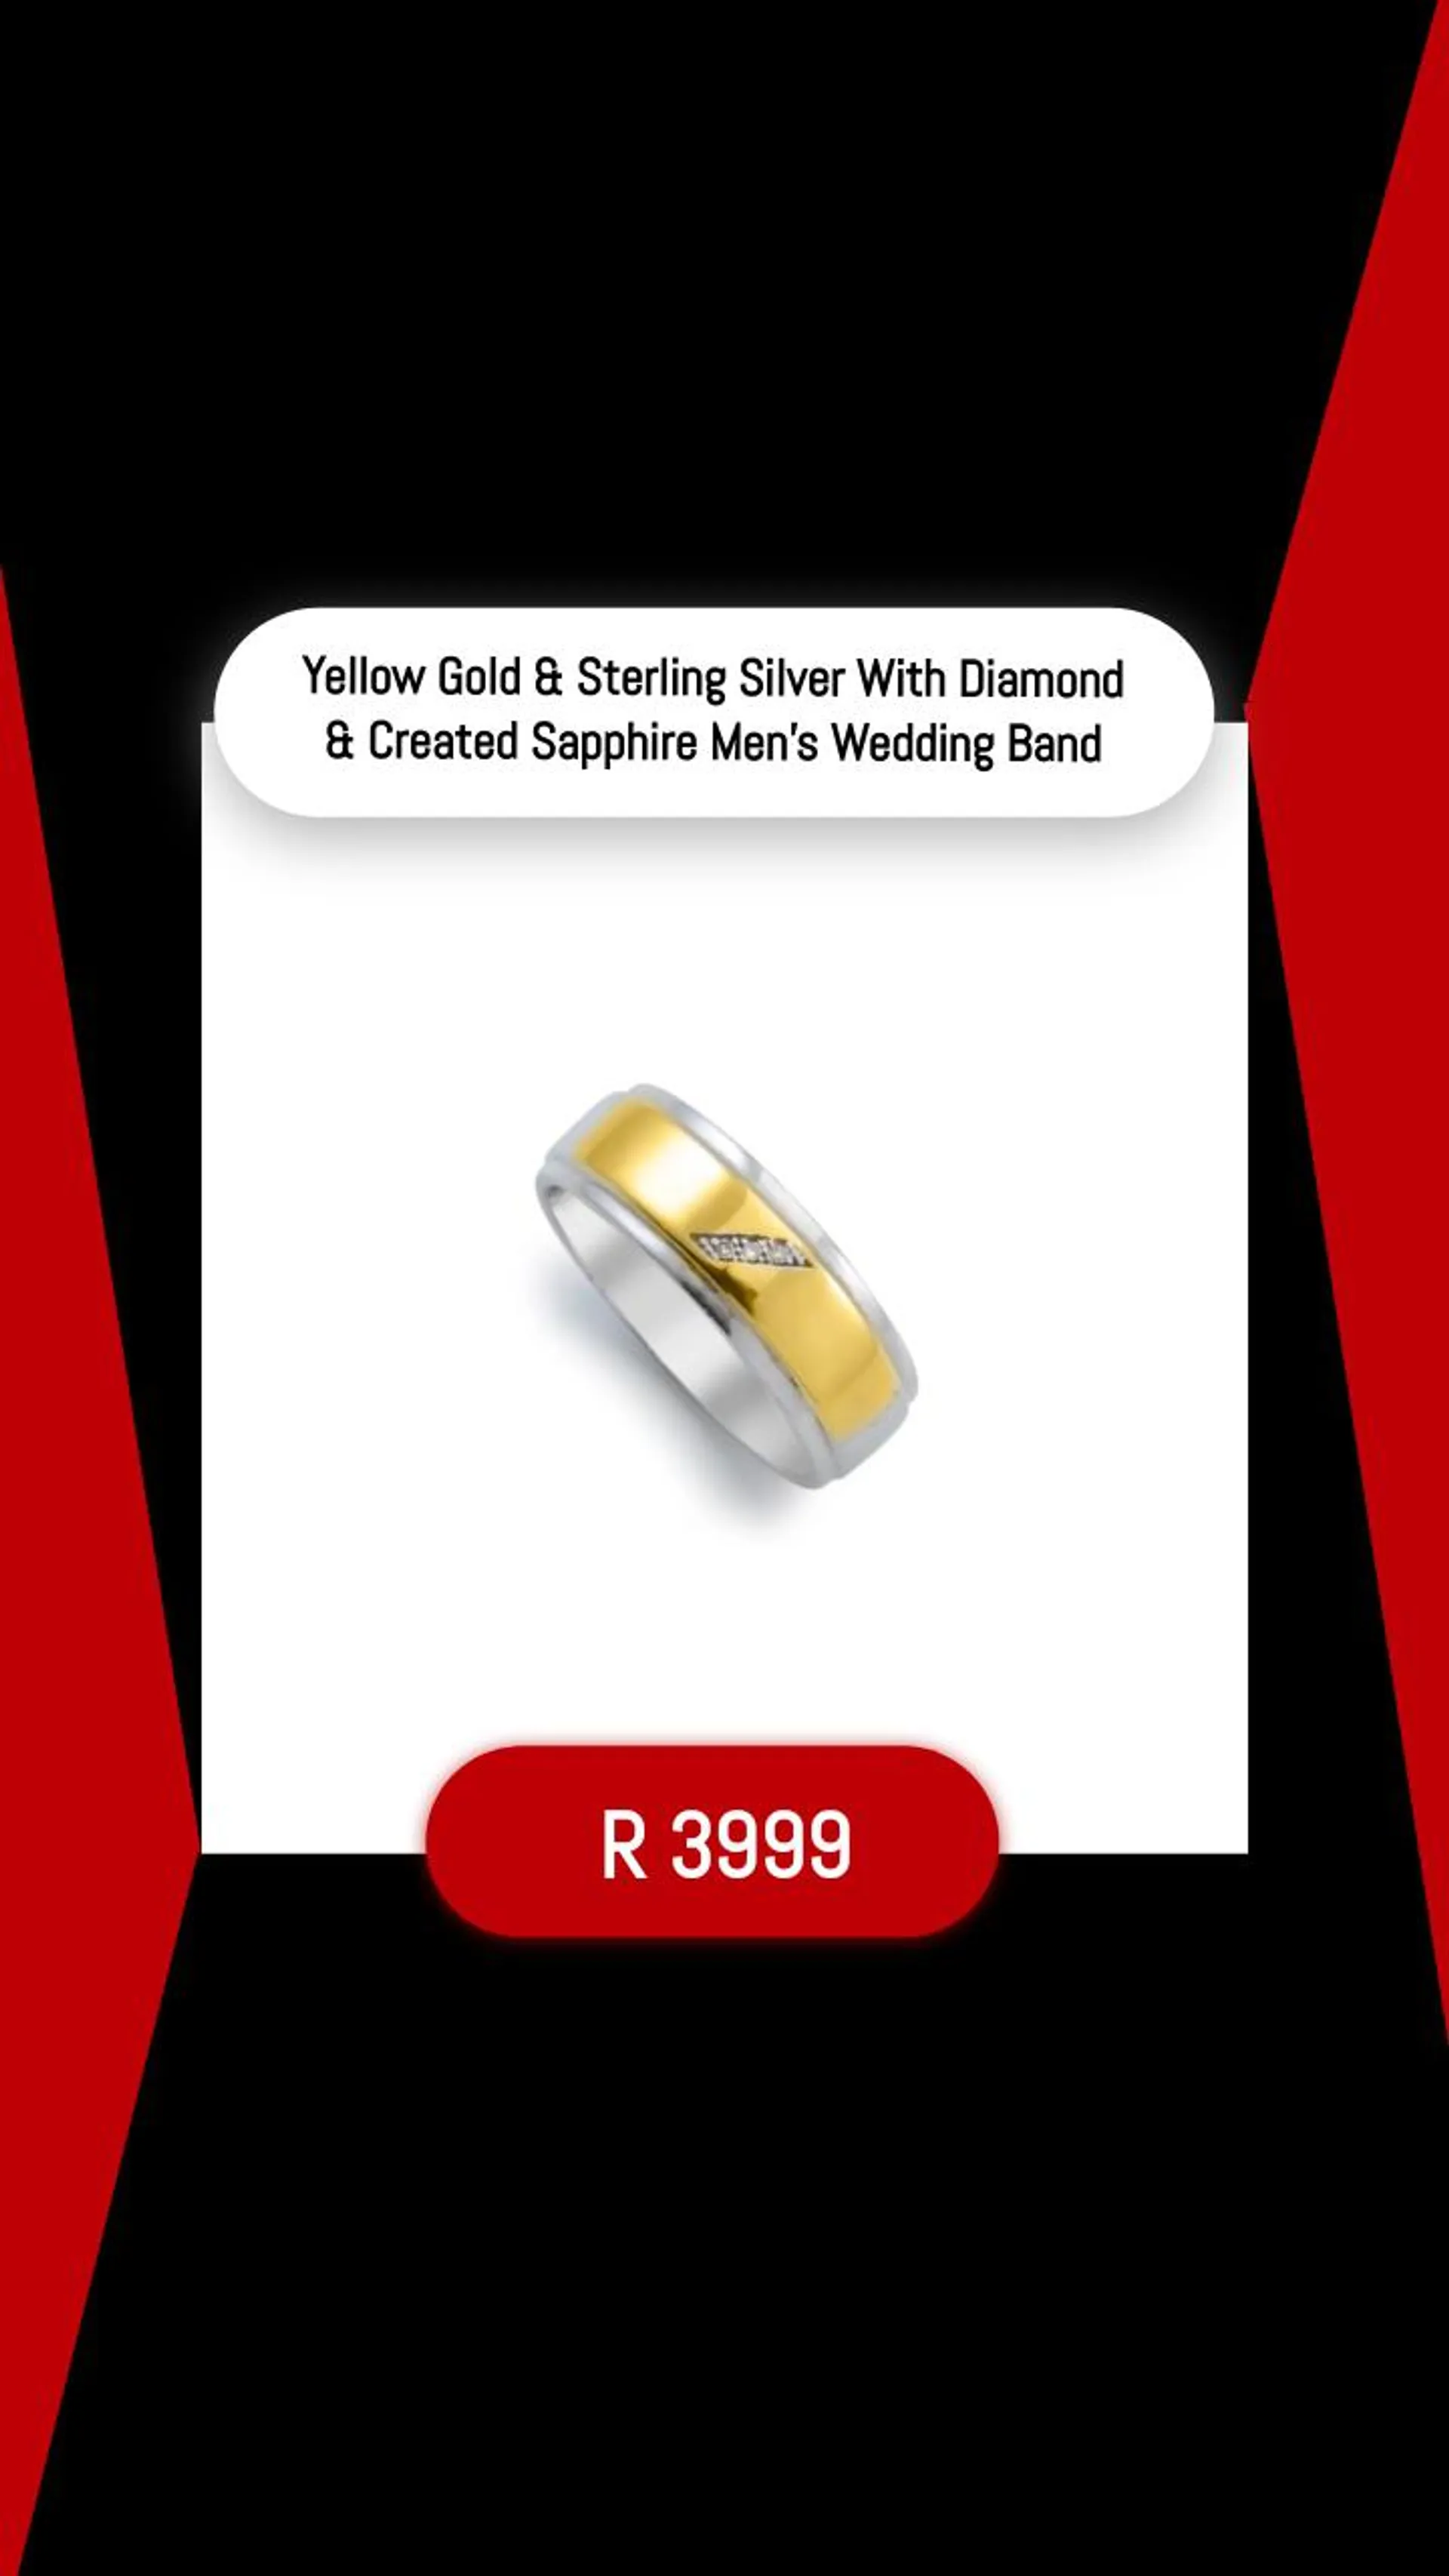 Yellow Gold & Sterling Silver With Diamond & Created Sapphire Mens Wedding Band